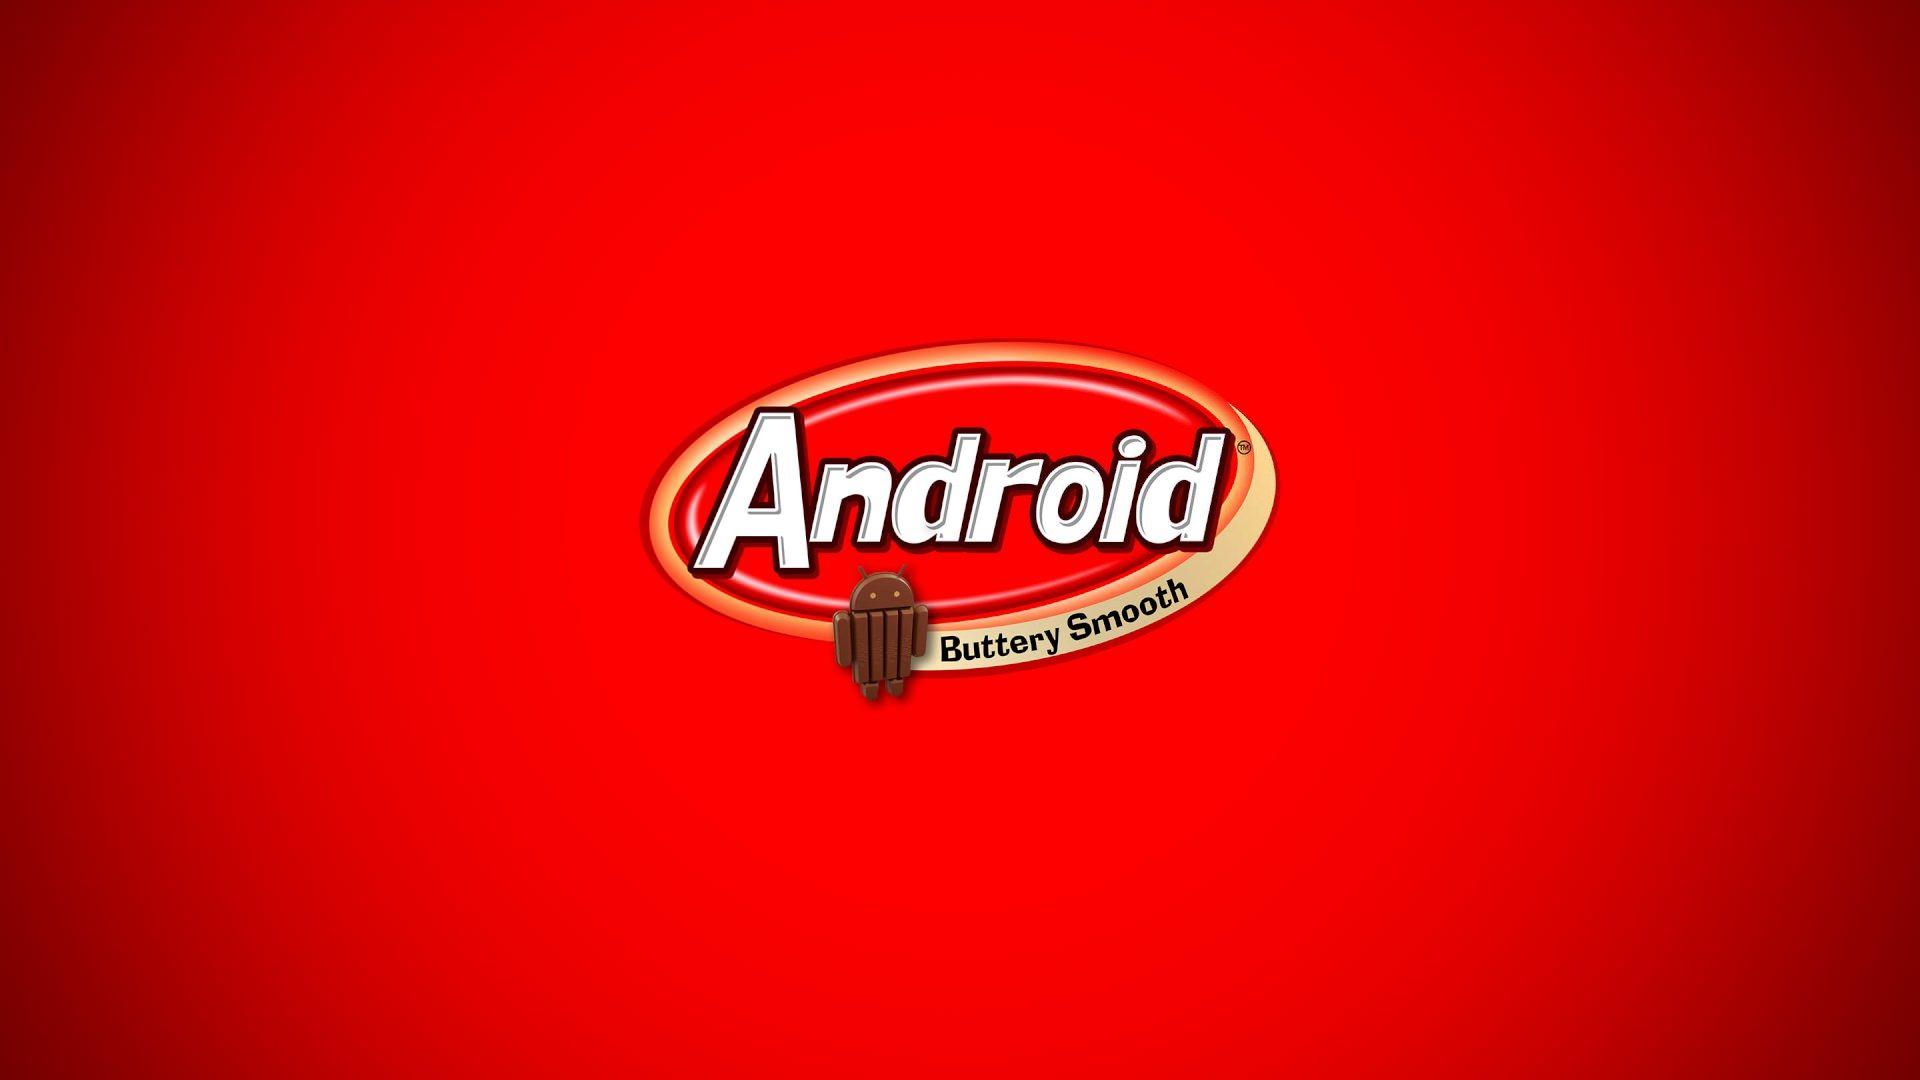 Android and Kitkat Wallpaper